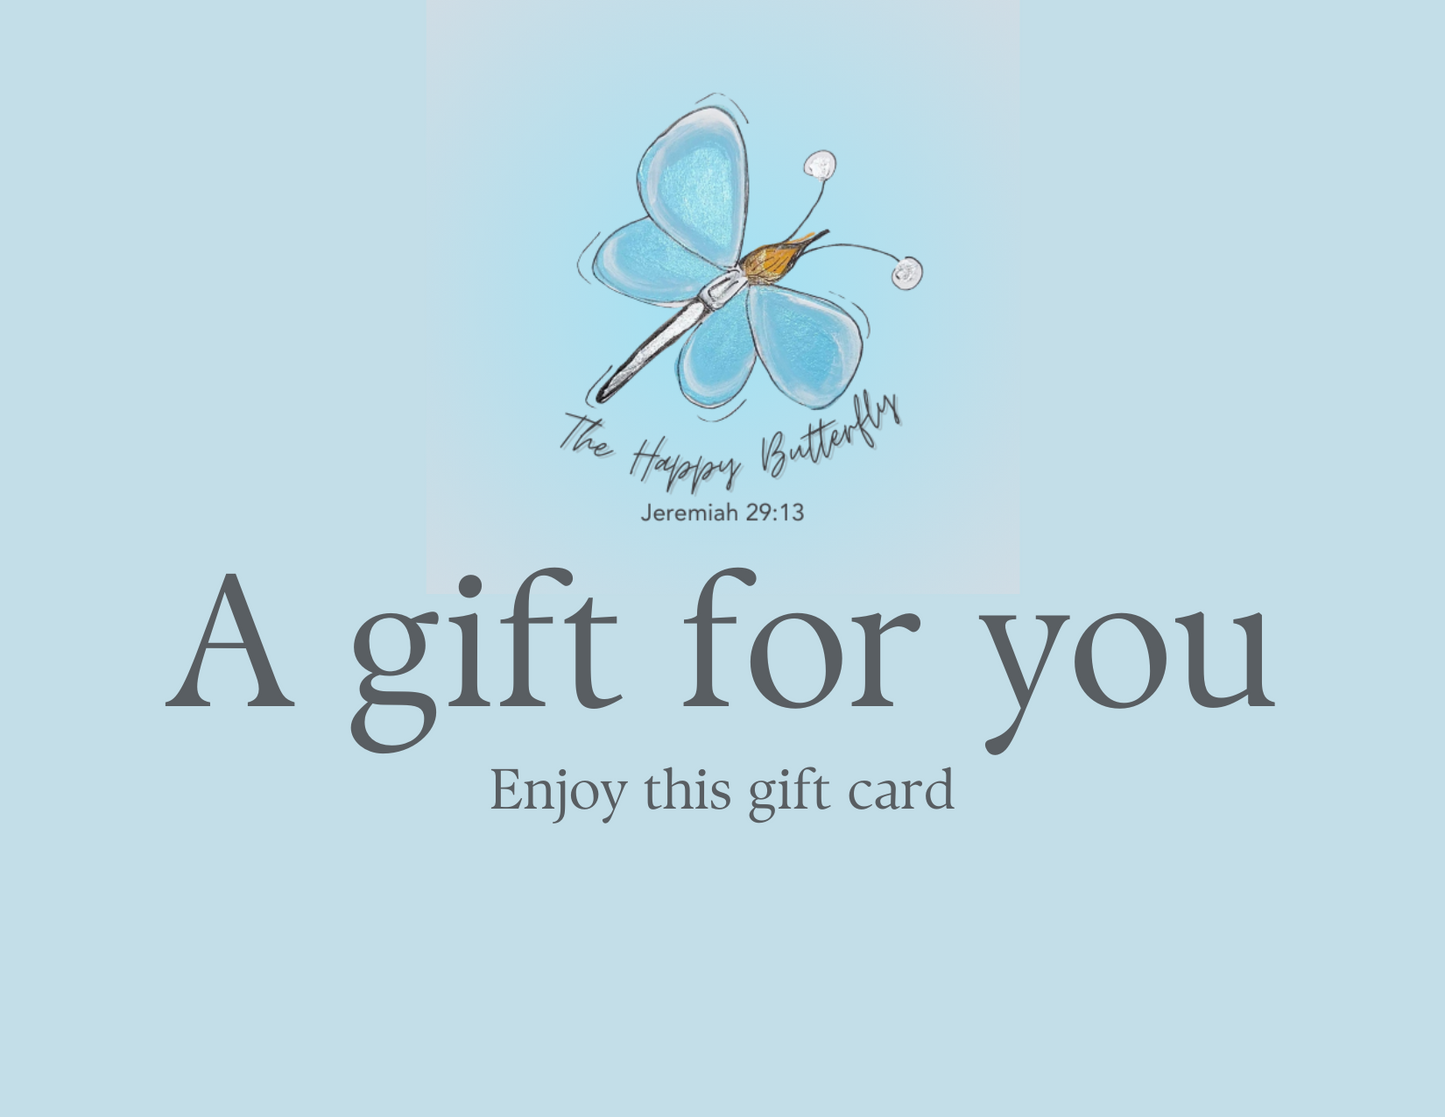 The Happy Butterfly Gift Card